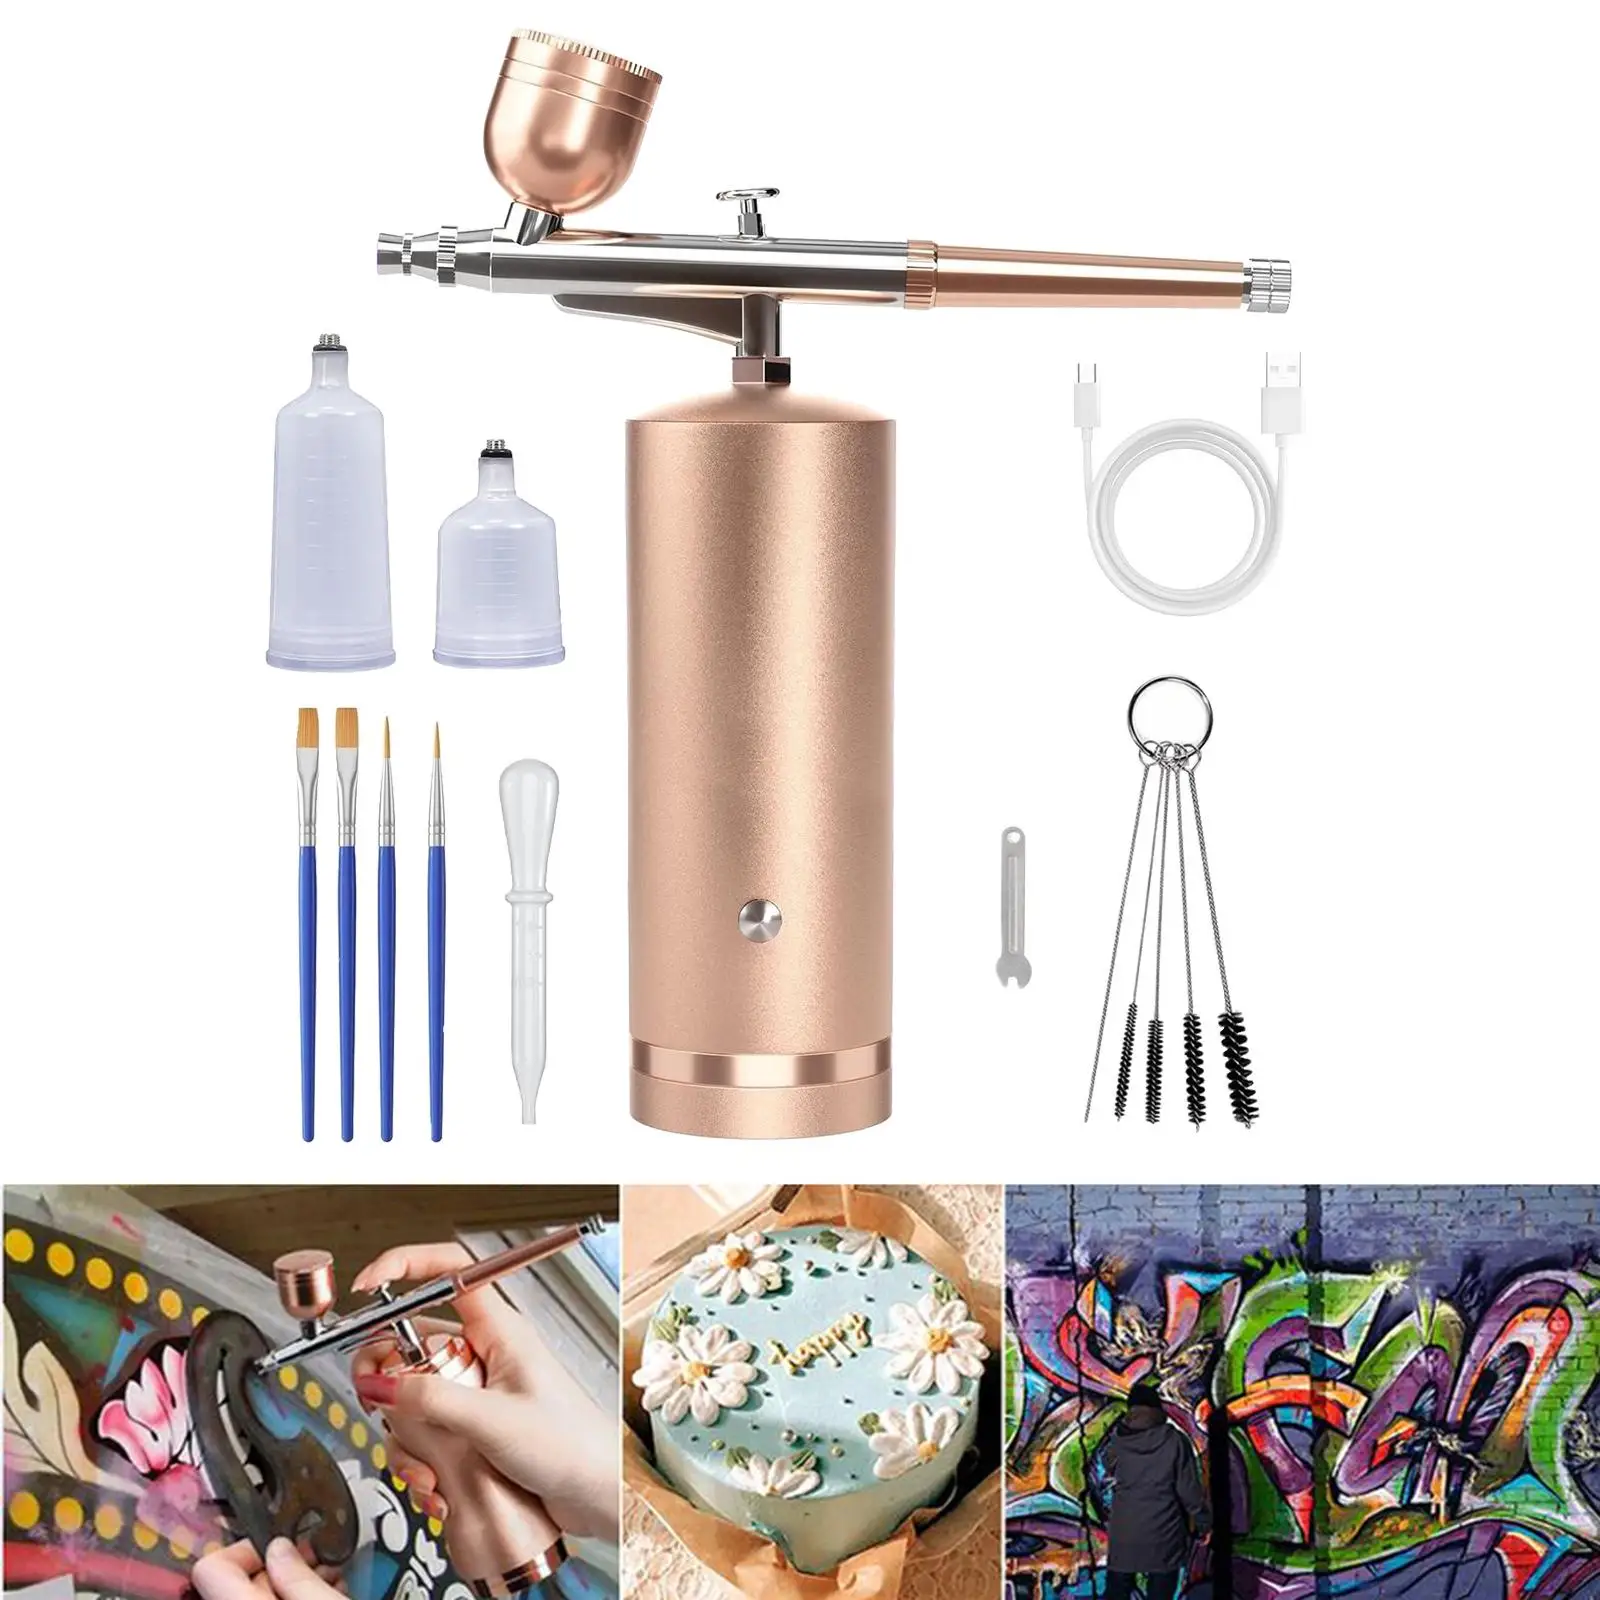 Airbrush Kits with Compressor Portable Handheld Nail Airbrush Machine for Painting Makeup Model Painting Craft Hobby Cakes Decor